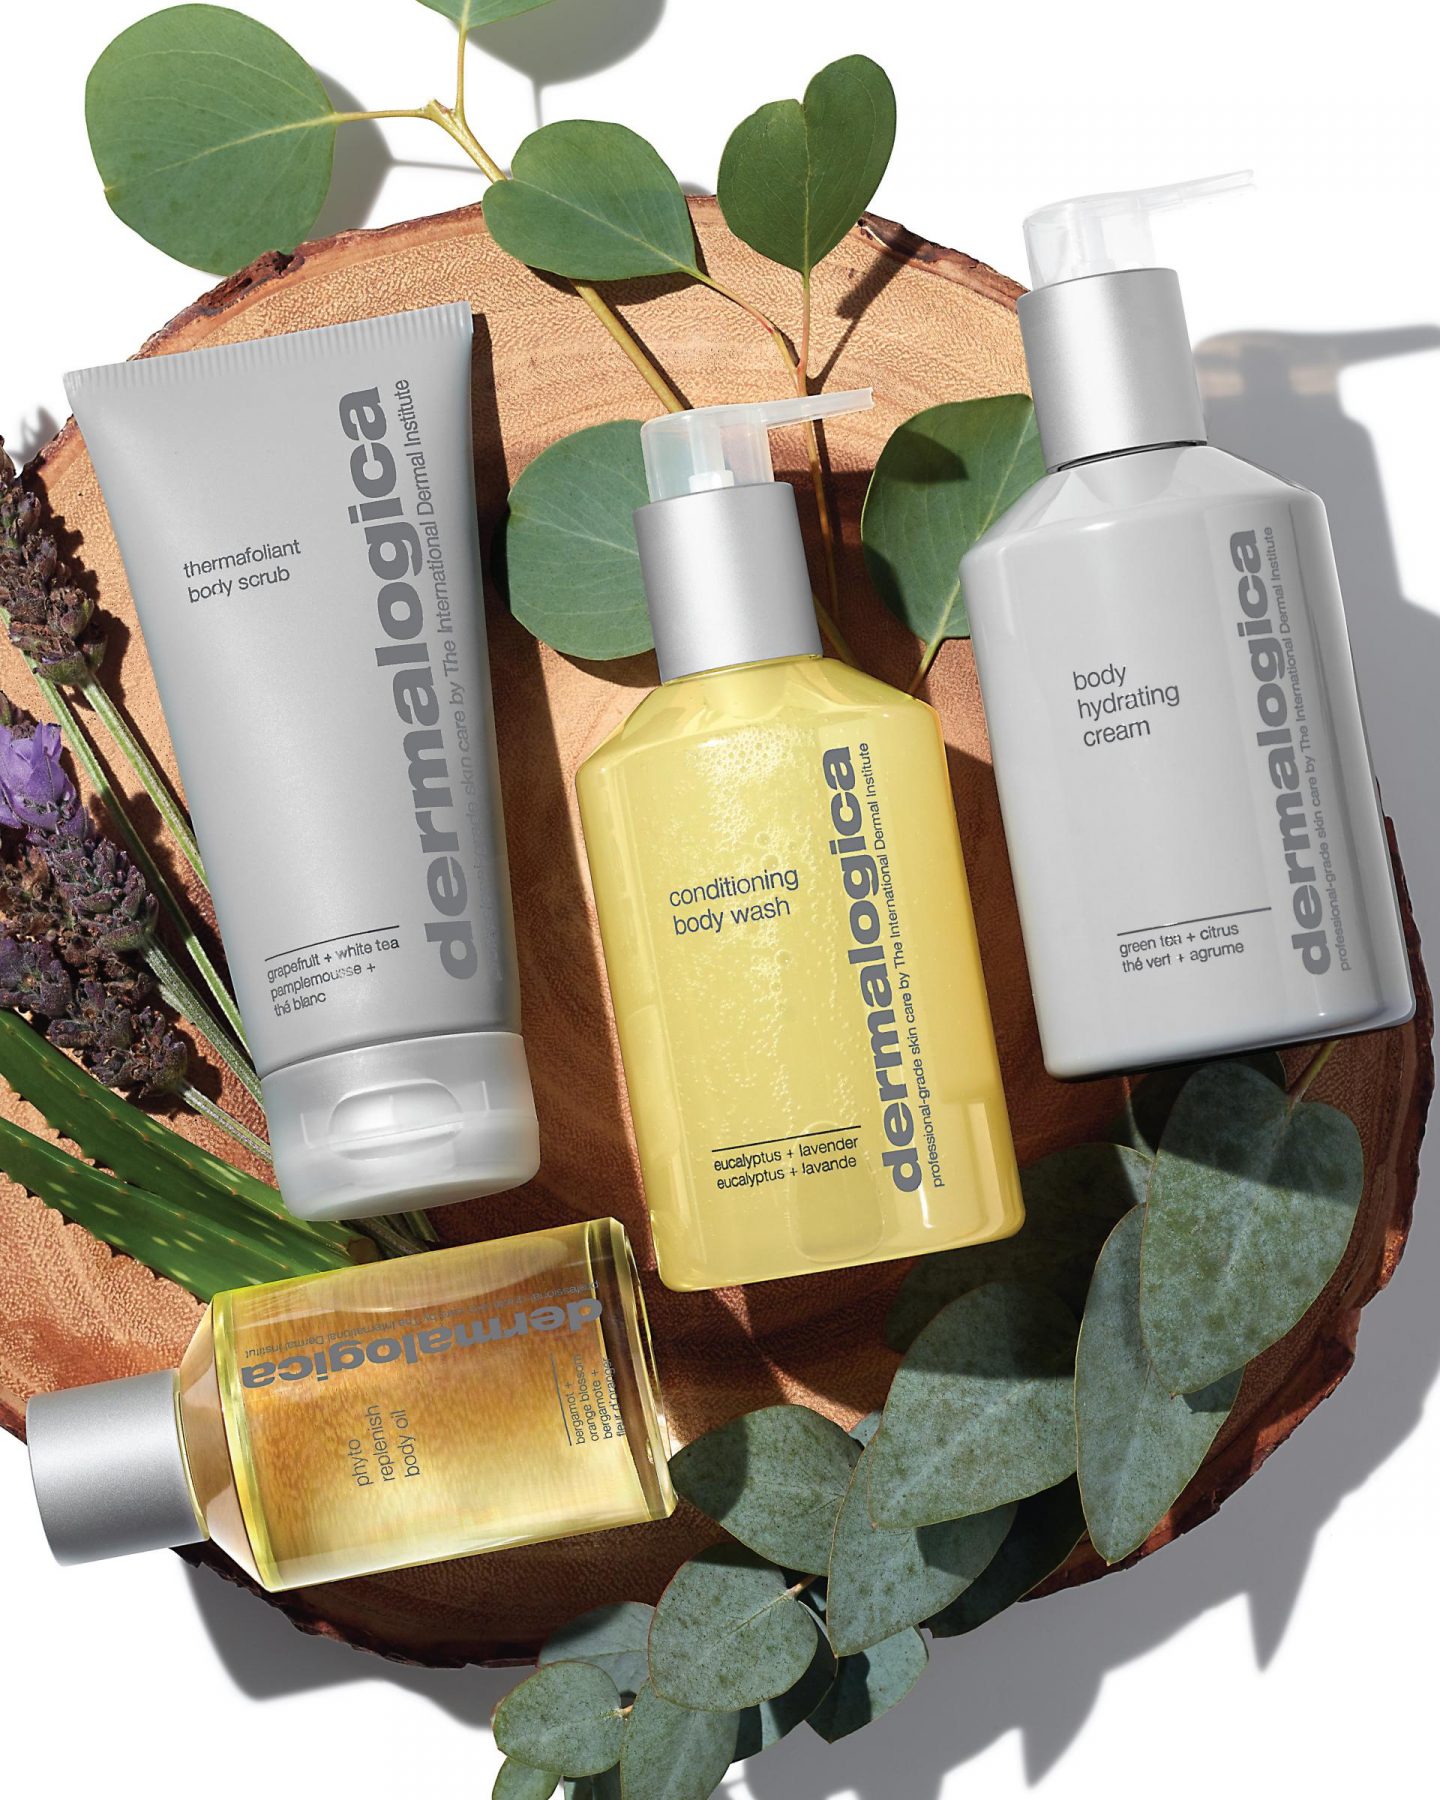 NEW! Dermalogica body collection